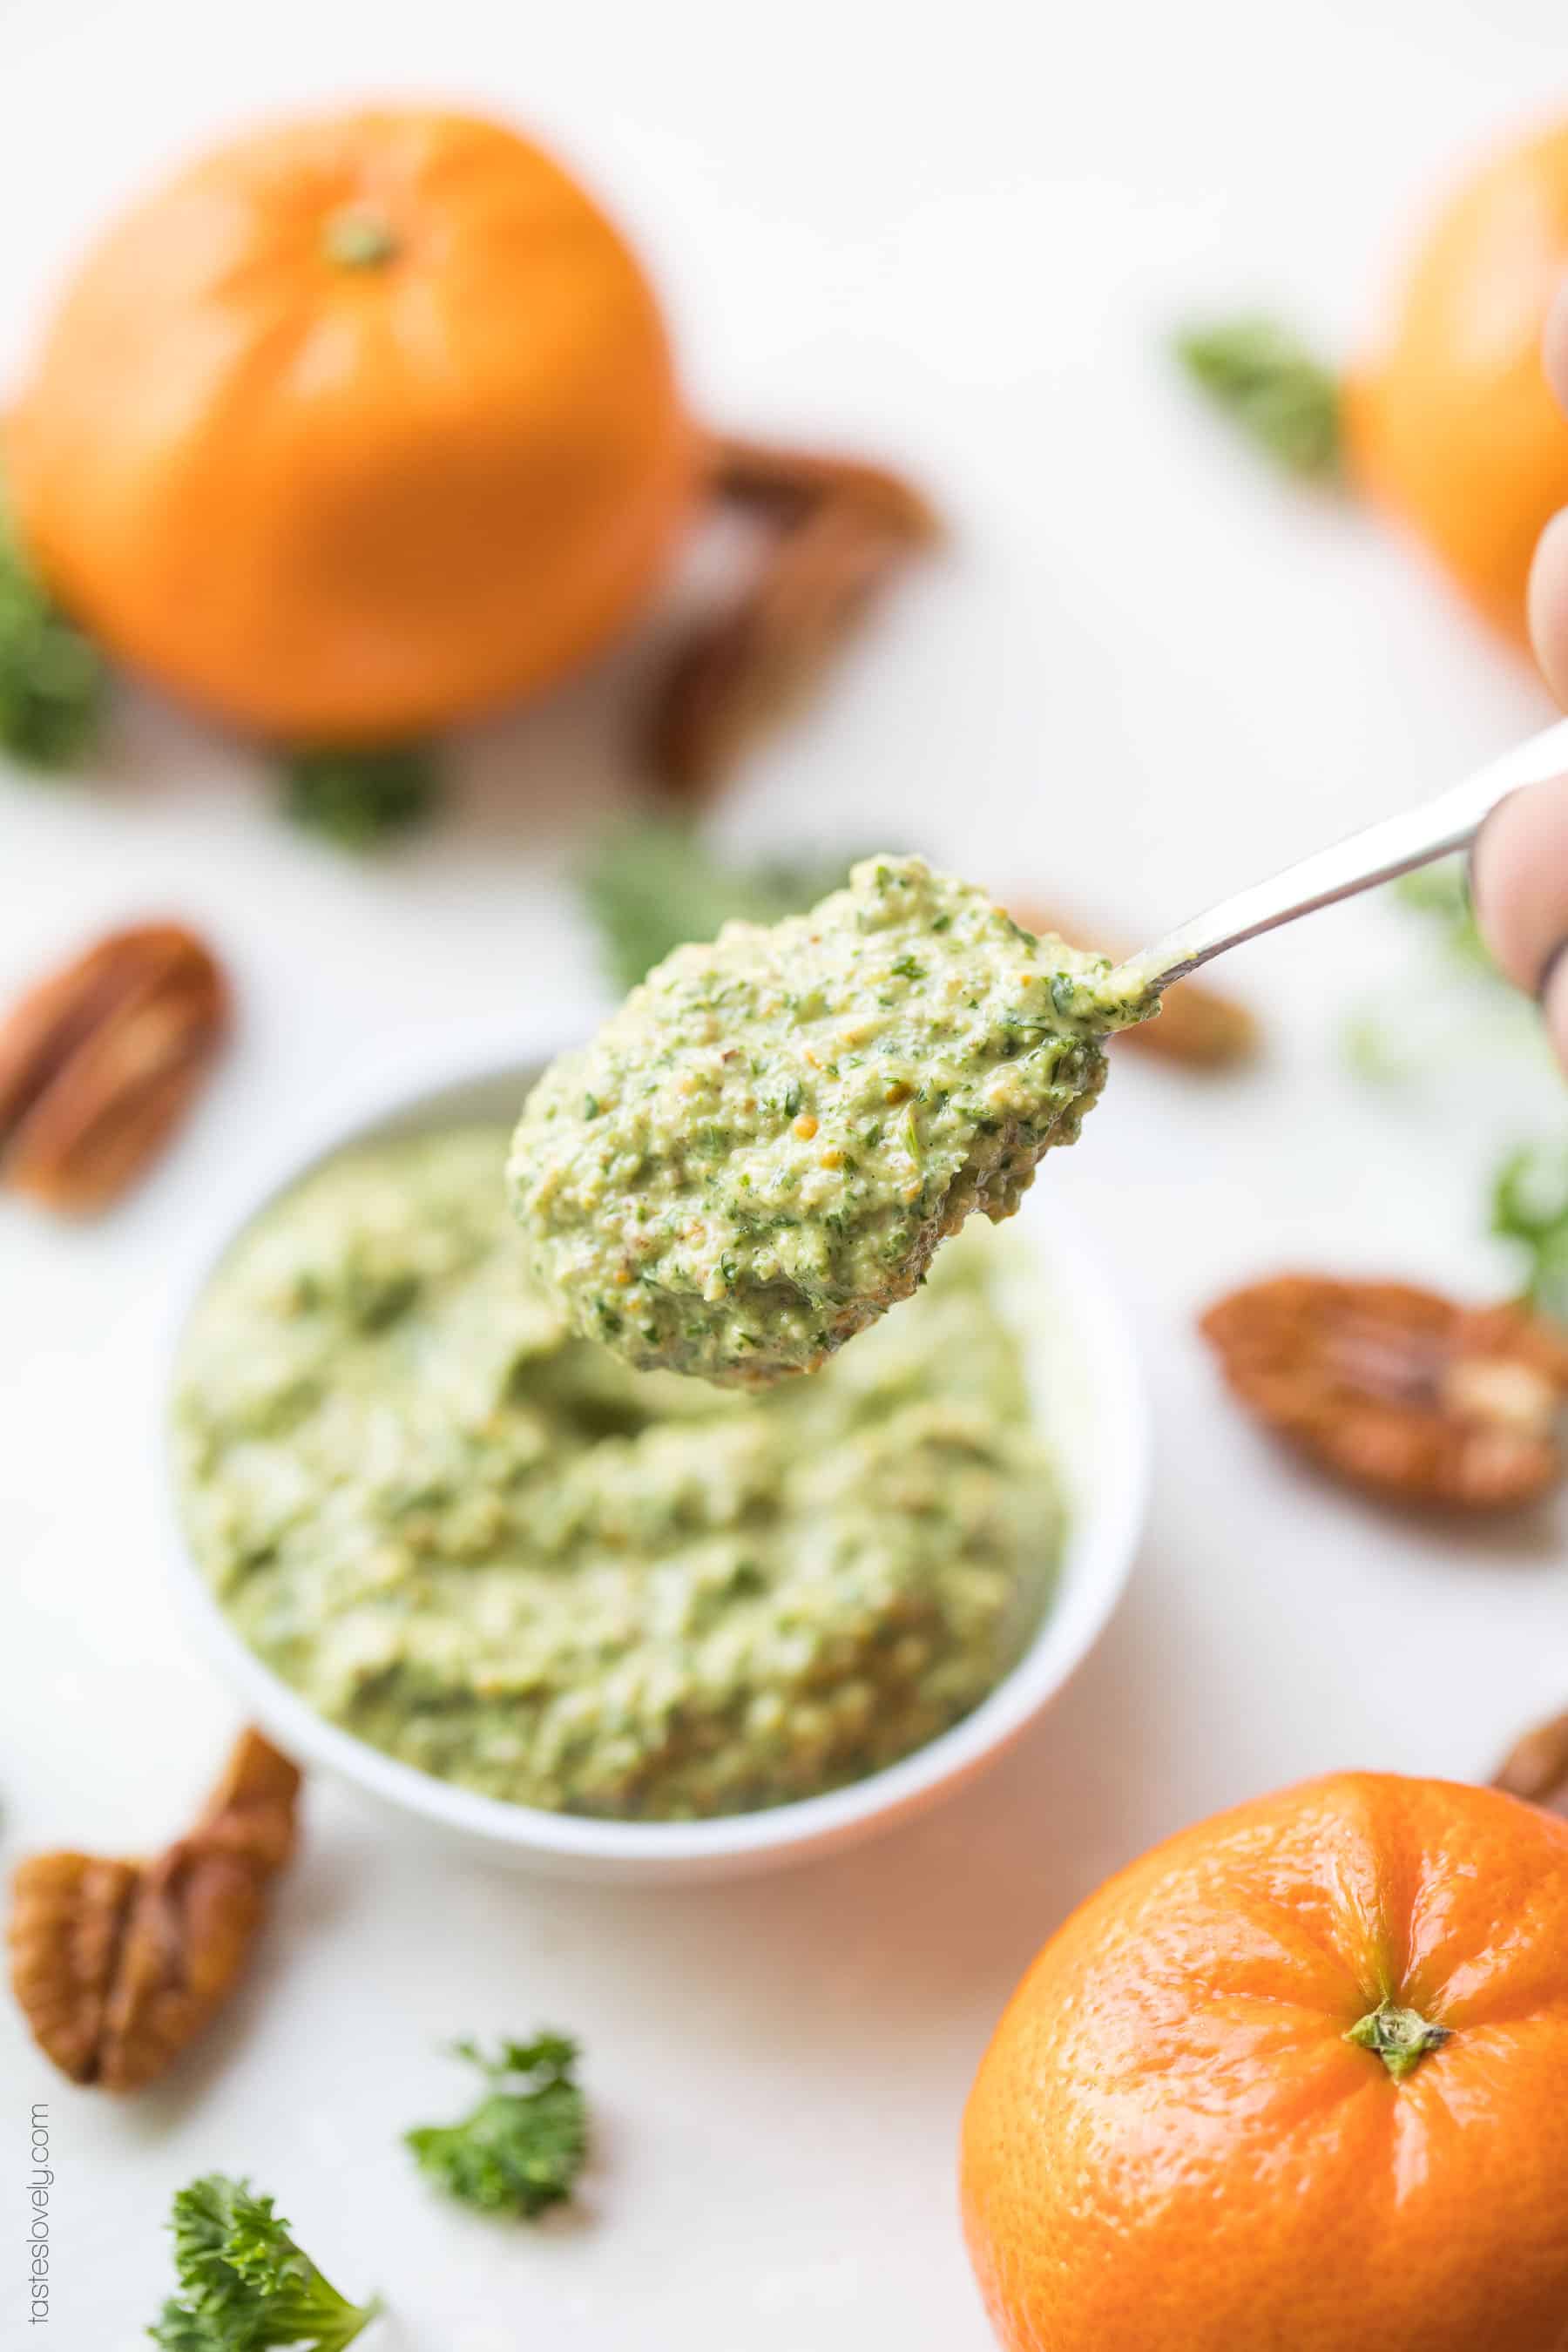 Paleo + Whole30 Orange Parsley Sauce - a citrusy and bright parsley sauce that is delicious on top of meat, fish and roasted vegetables. Gluten free, grain free, dairy free, sugar free, sugar free, clean eating, real food.